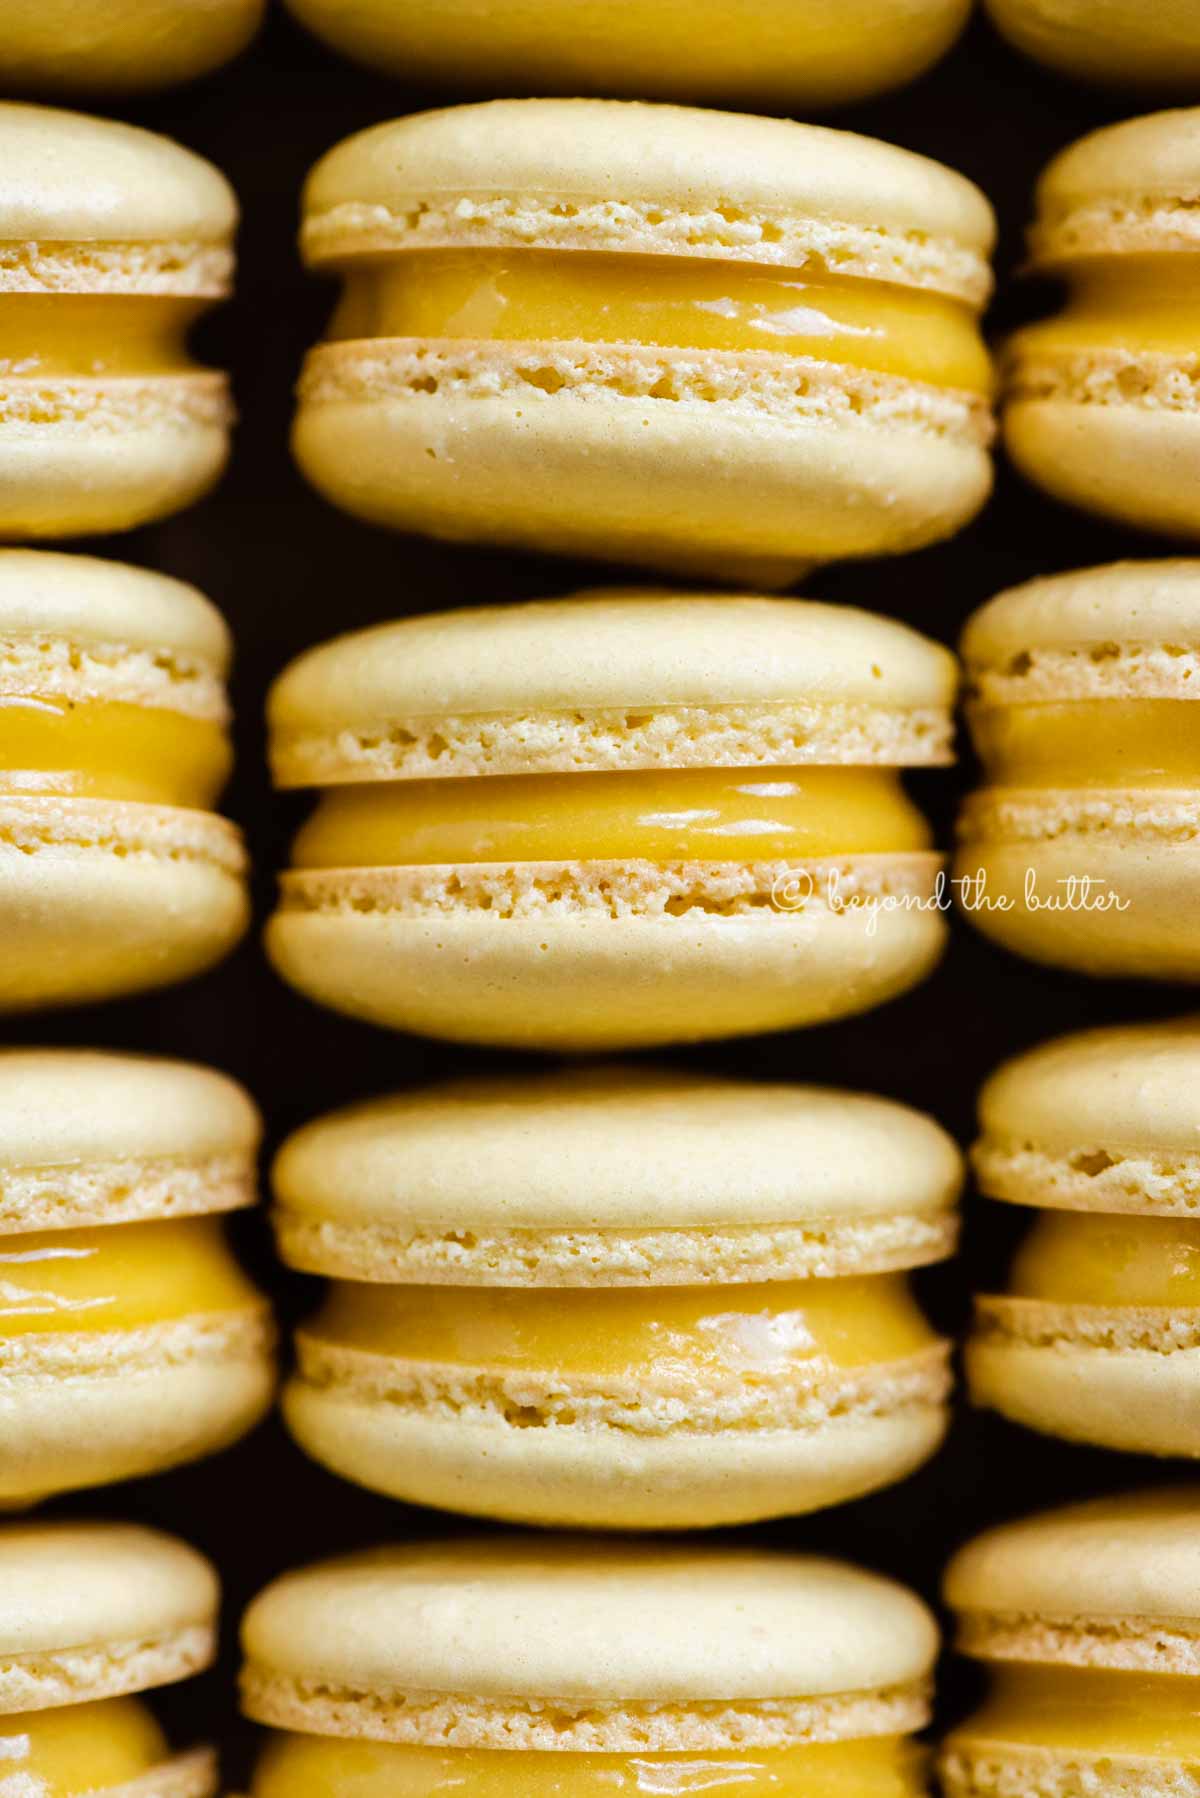 Close up of lemon bar macarons on side | All Images © Beyond the Butter™